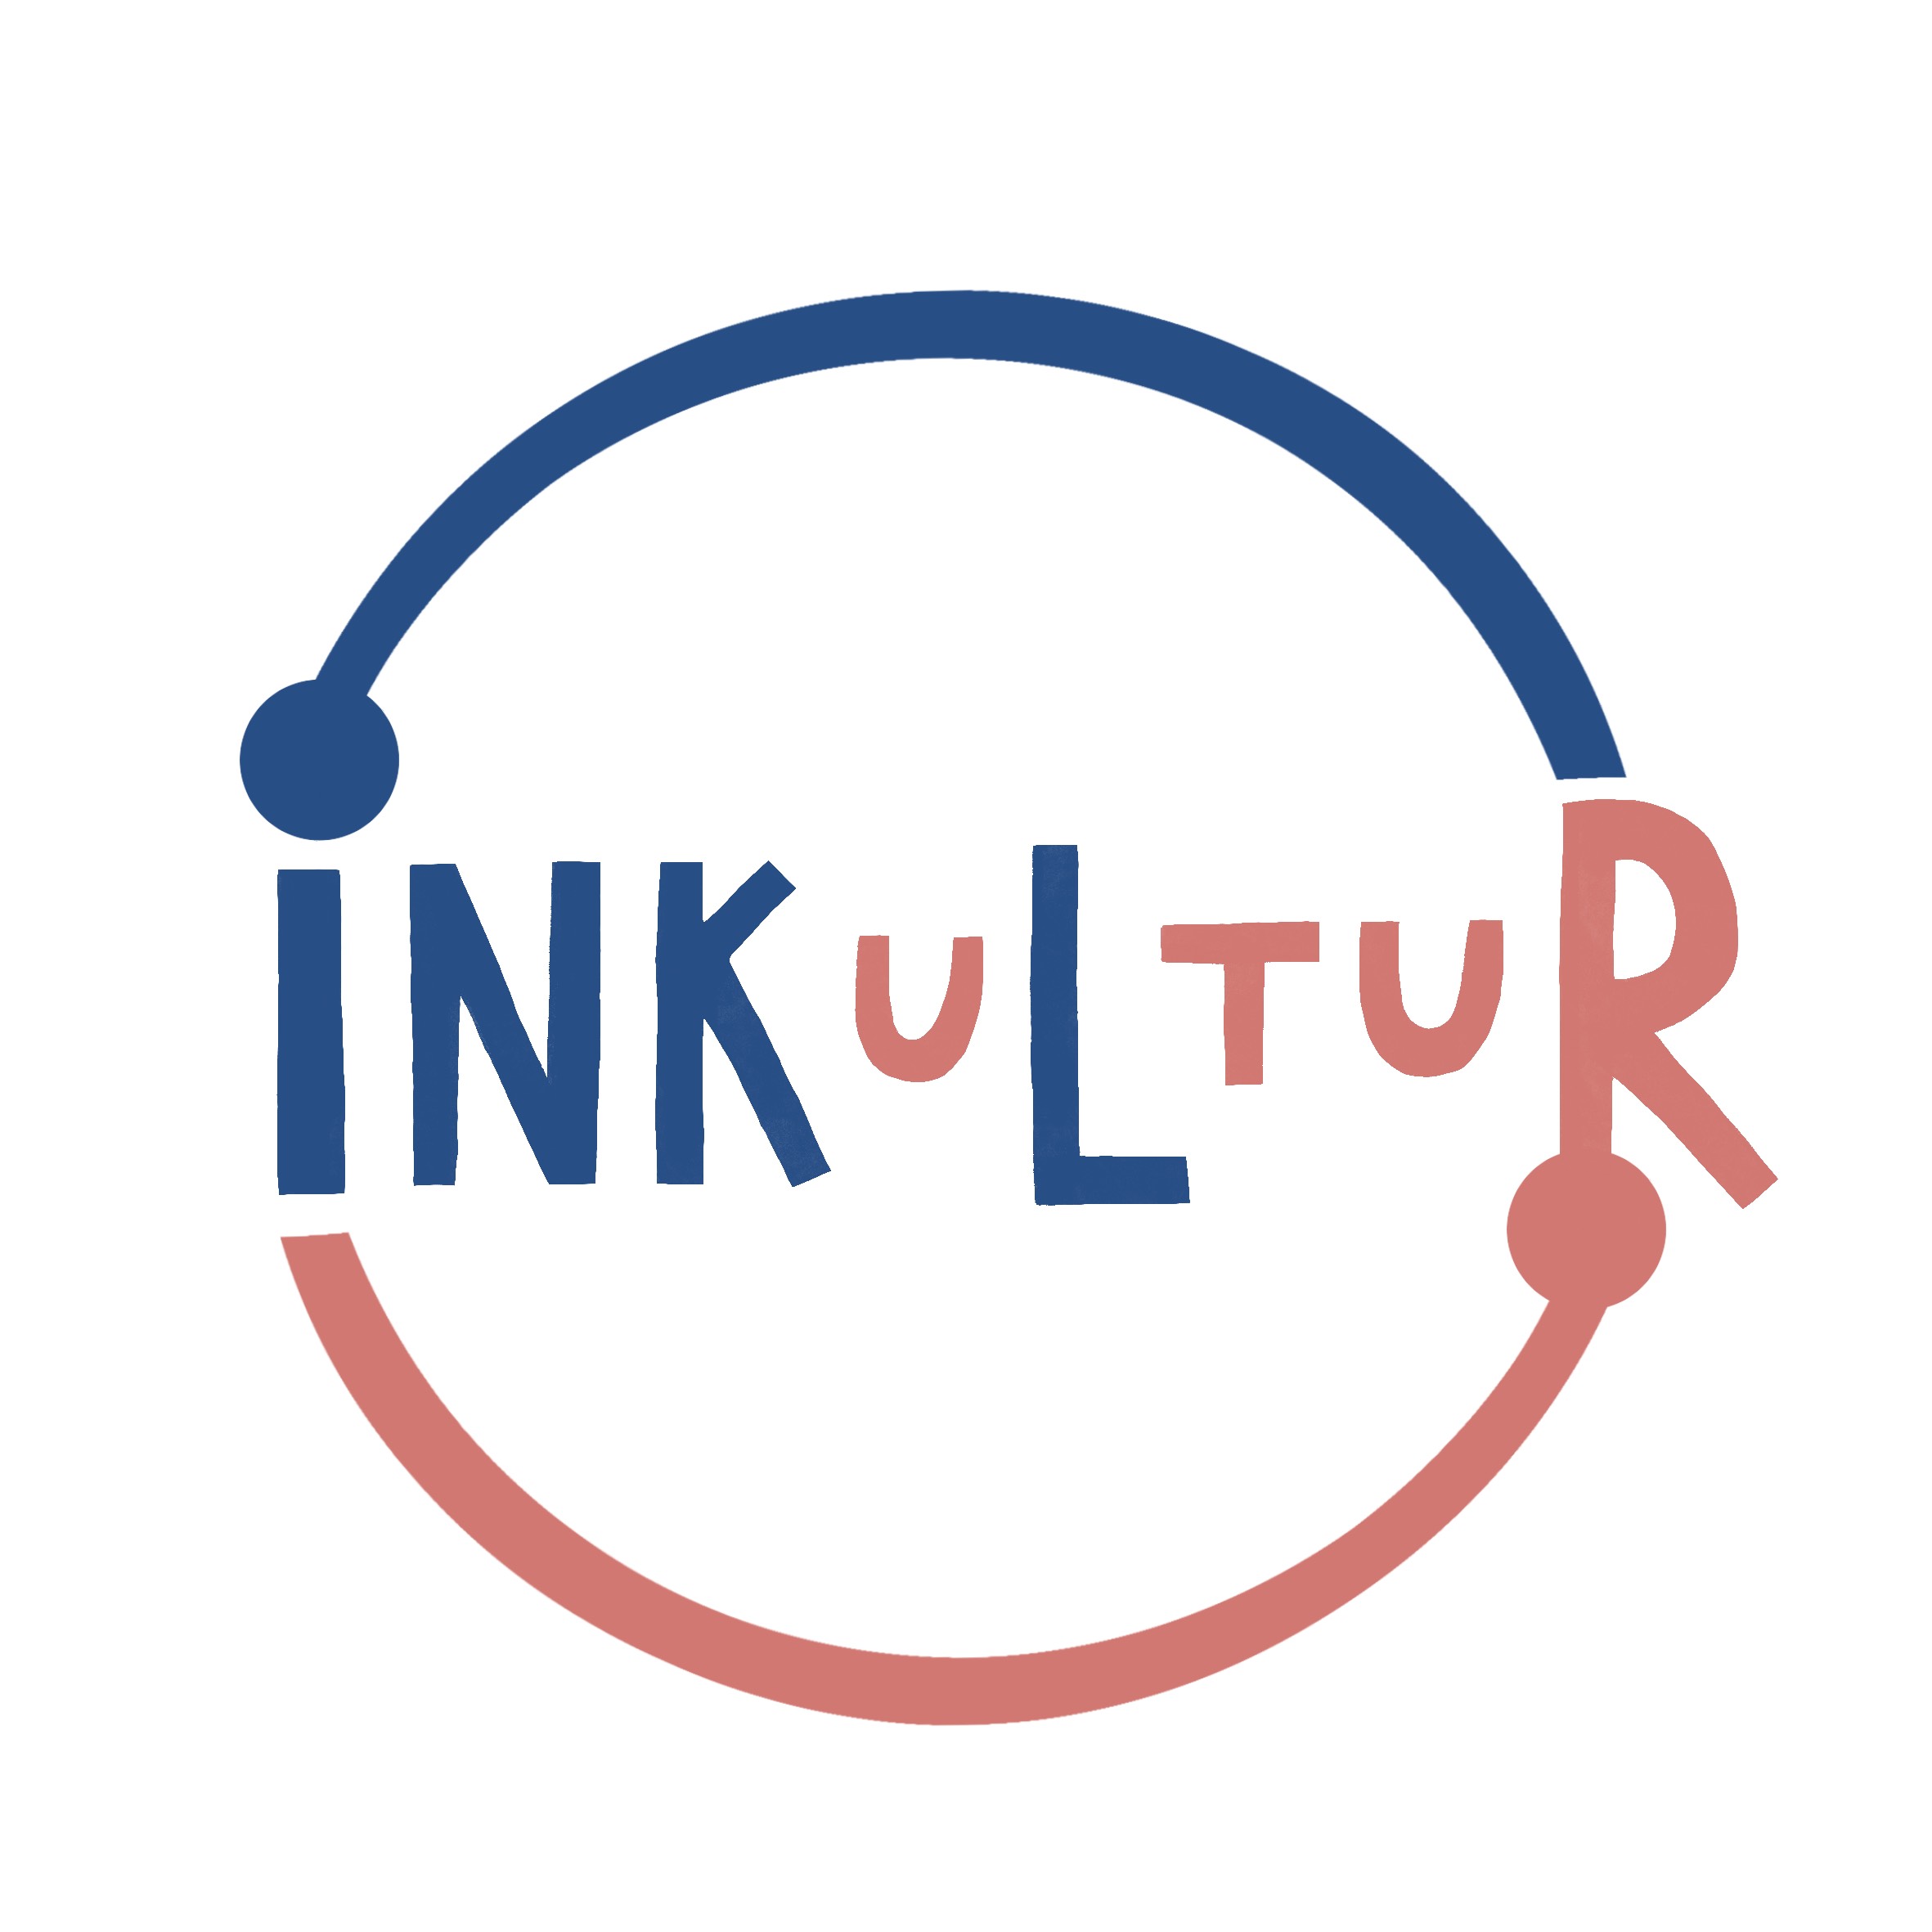 “INKuLtur – For Inclusion and Participation in Сultural Life”